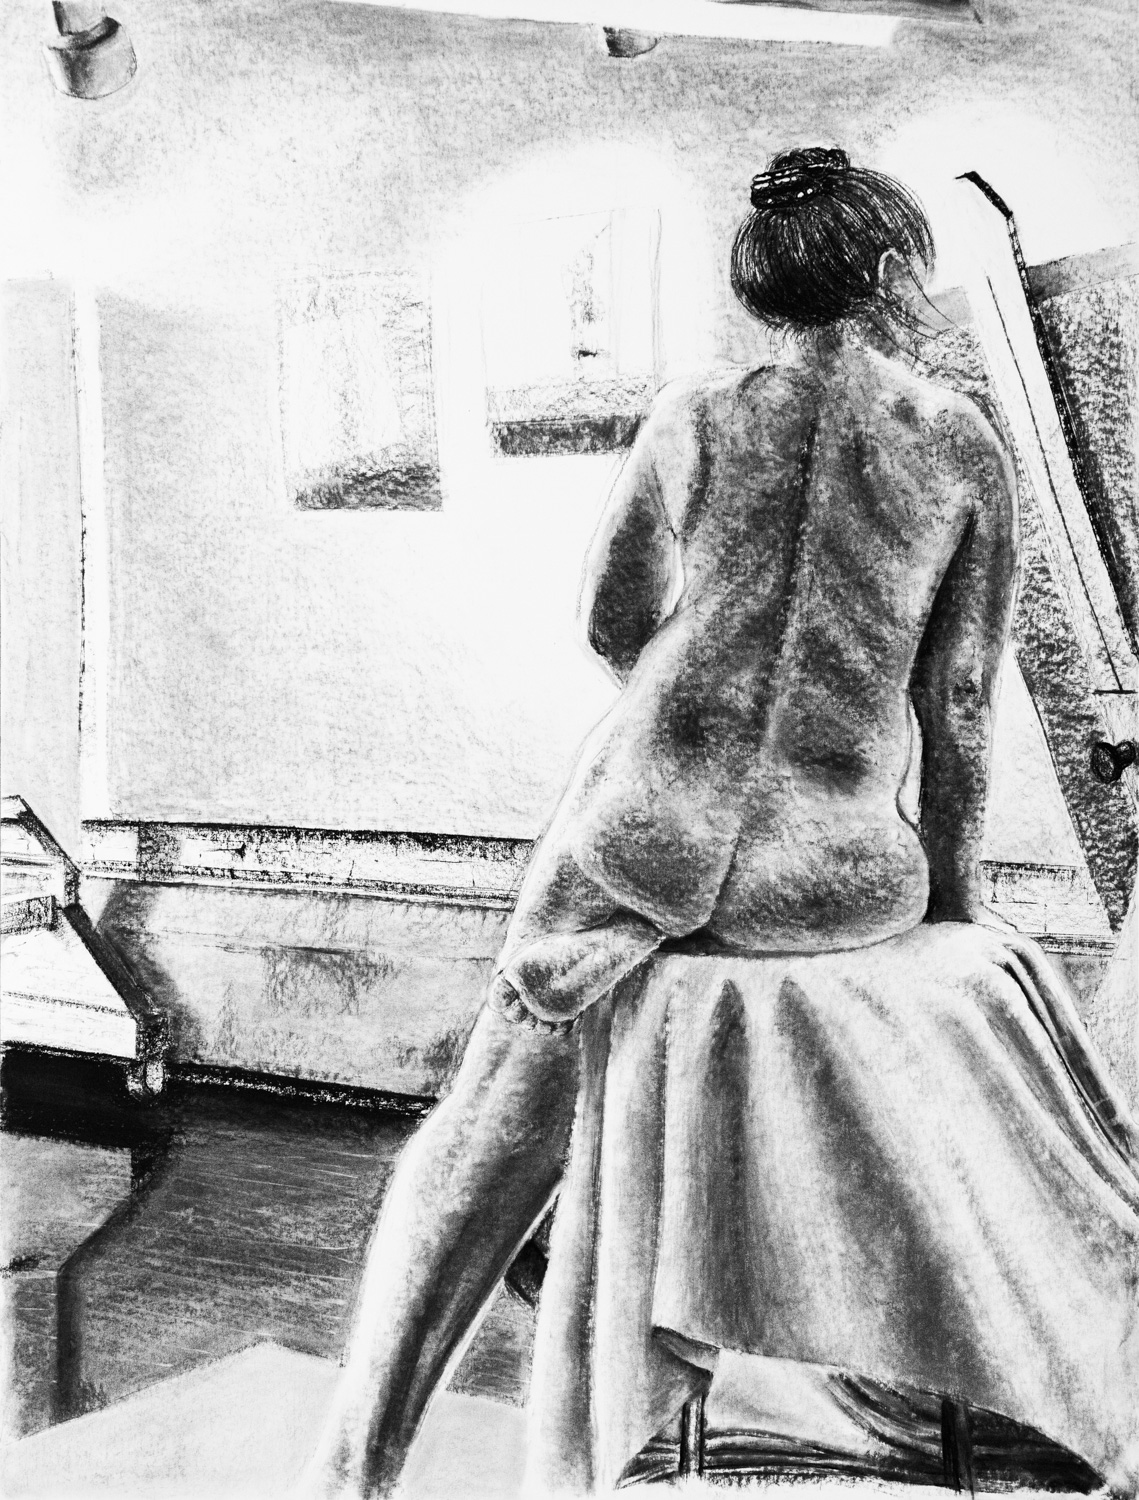 Large charcoal drawing of the back of a sitting nude figure.